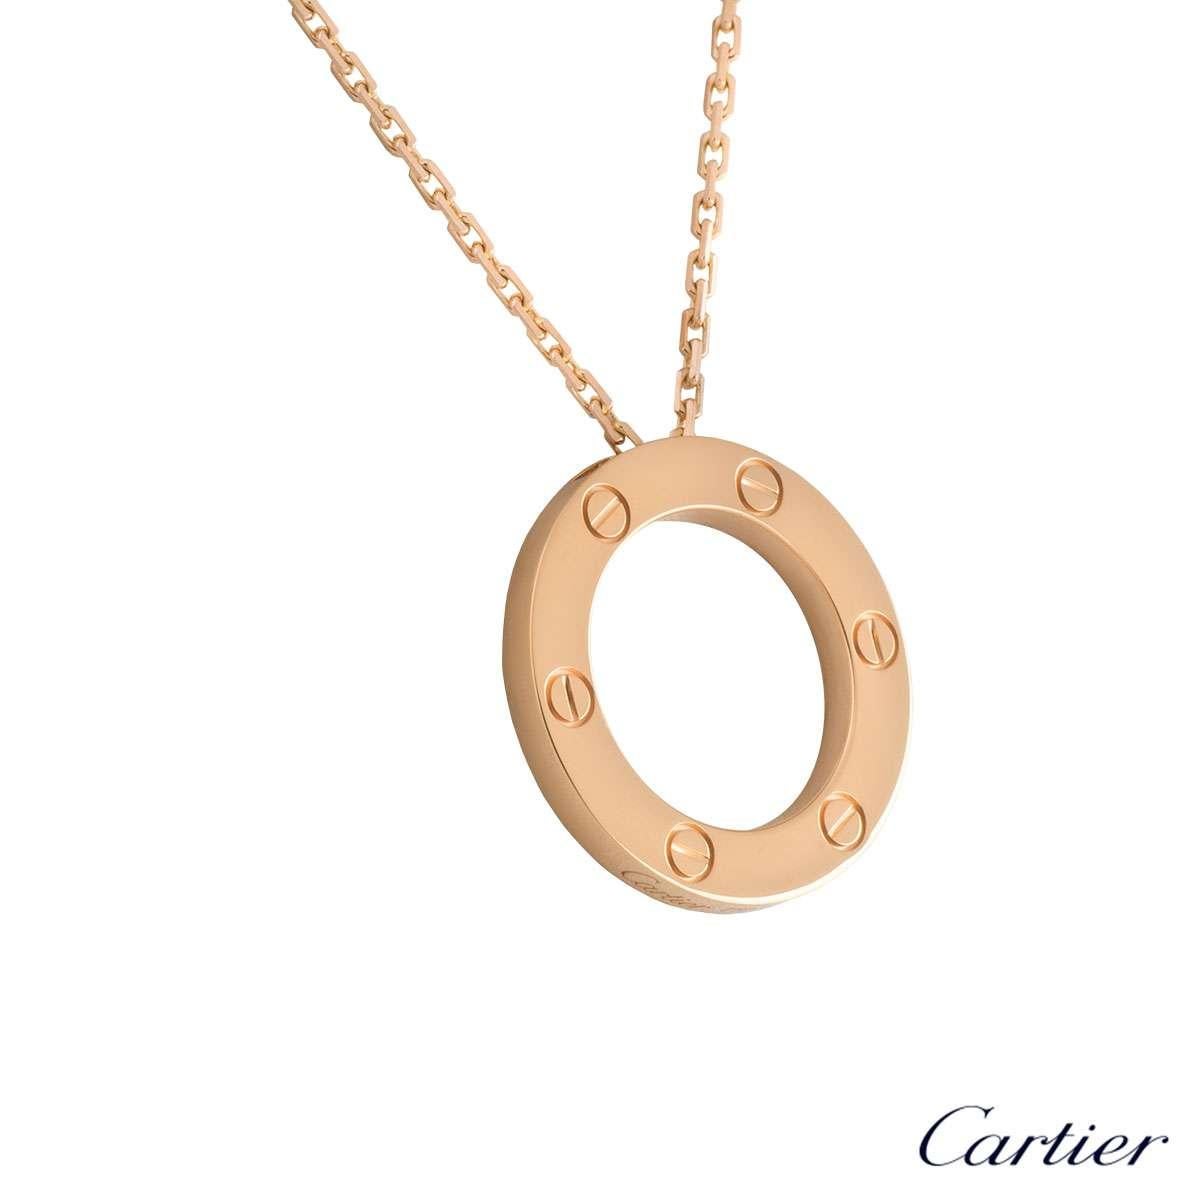 An 18k rose gold pendant from the Cartier Love collection. The pendant is composed of an open work circular motif, set to the outer edge with the iconic screw motifs. On the reverse of the pendant the word 'Love' is engraved to the bottom. The